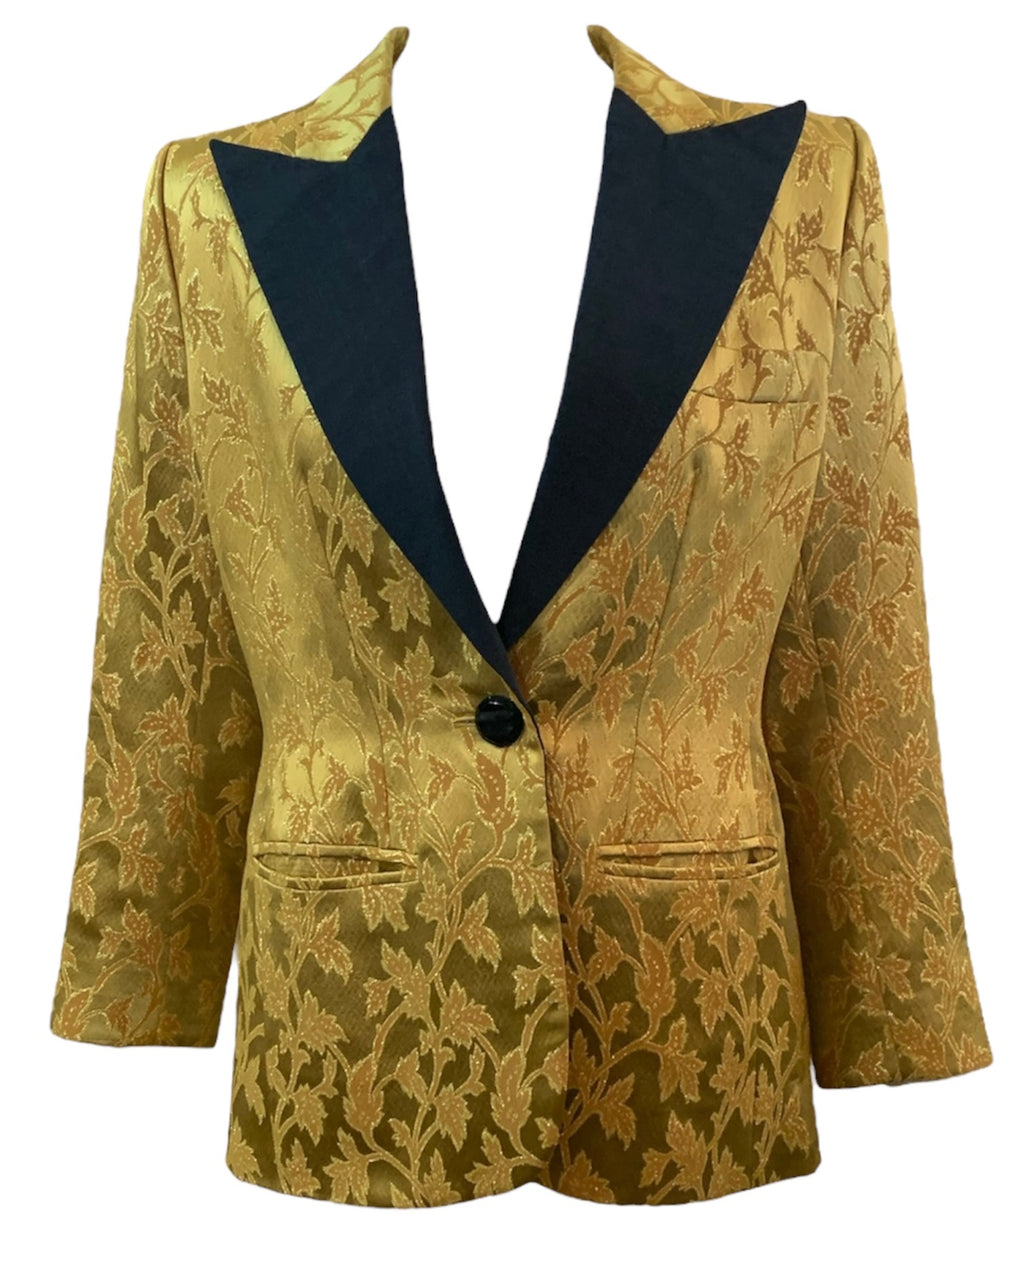 YSL Rive Gauche 1990s Yellow Jacquard Tuxedo Jacket with Peaked Lapel FRONT CLOSED 1 of 7